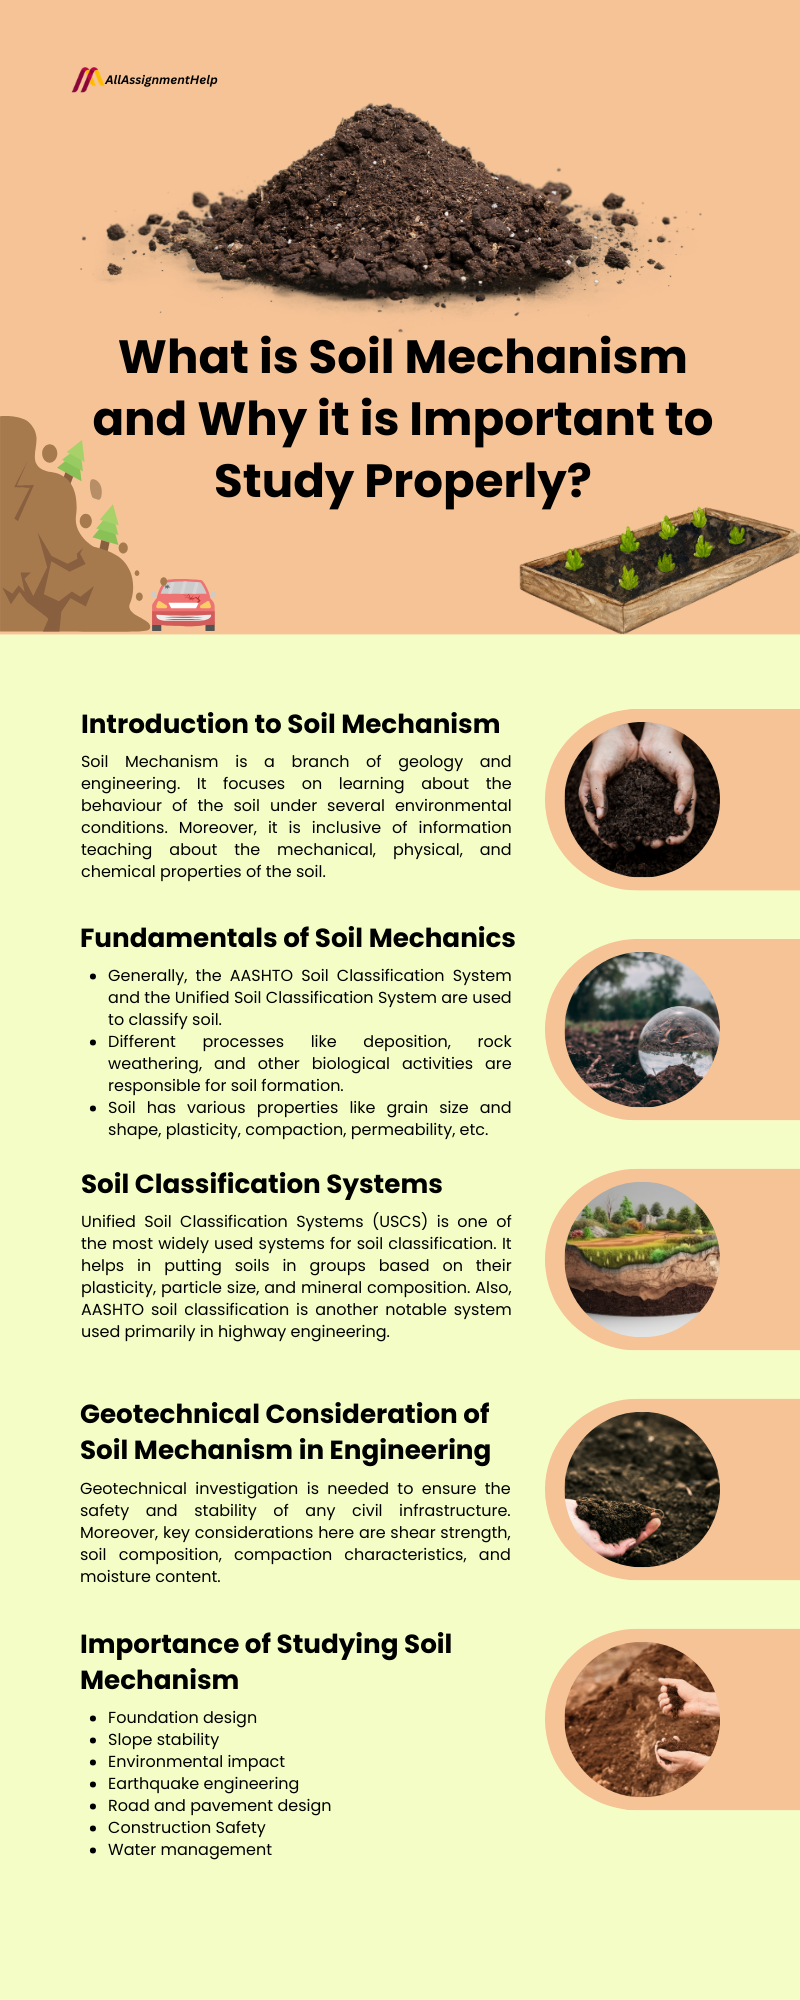 What-is-Soil-Mechanism-and-Why-it-is-Important-to-Study-Properly-2.png
